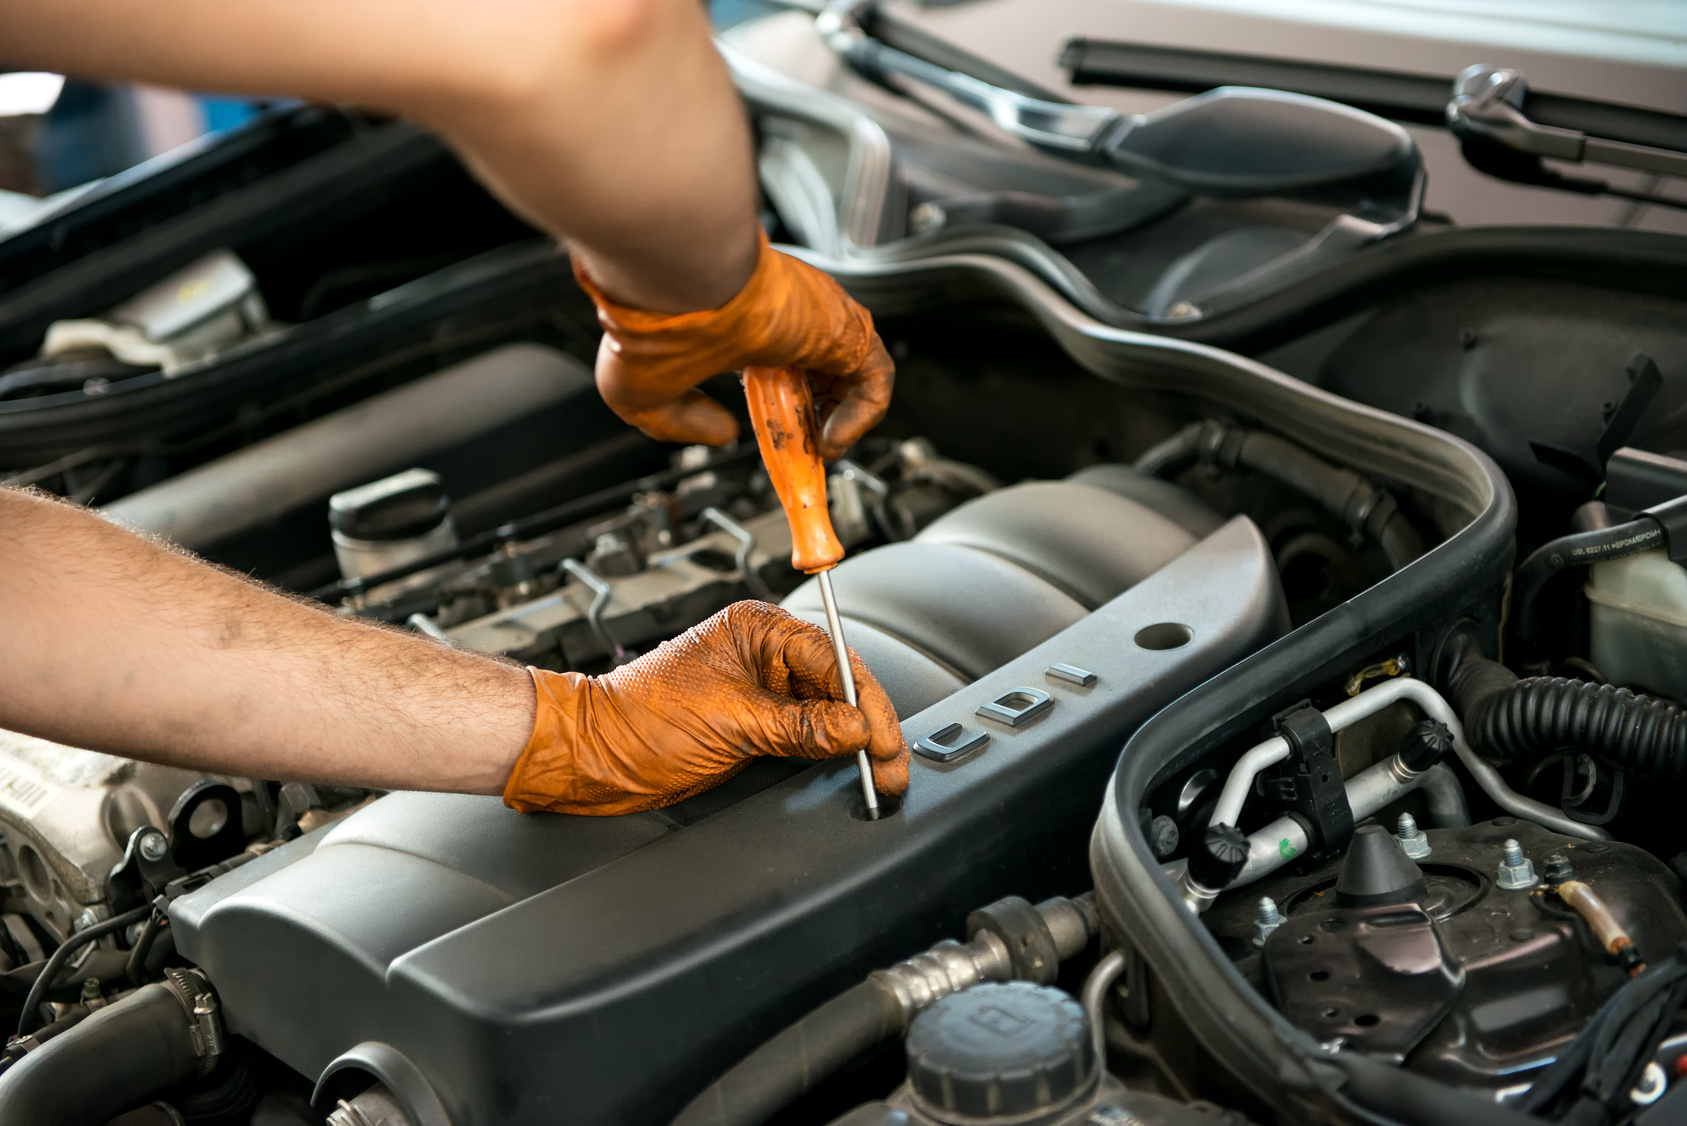 Top 5 Best Car Repair Tips You Need to Know About - Motor Era